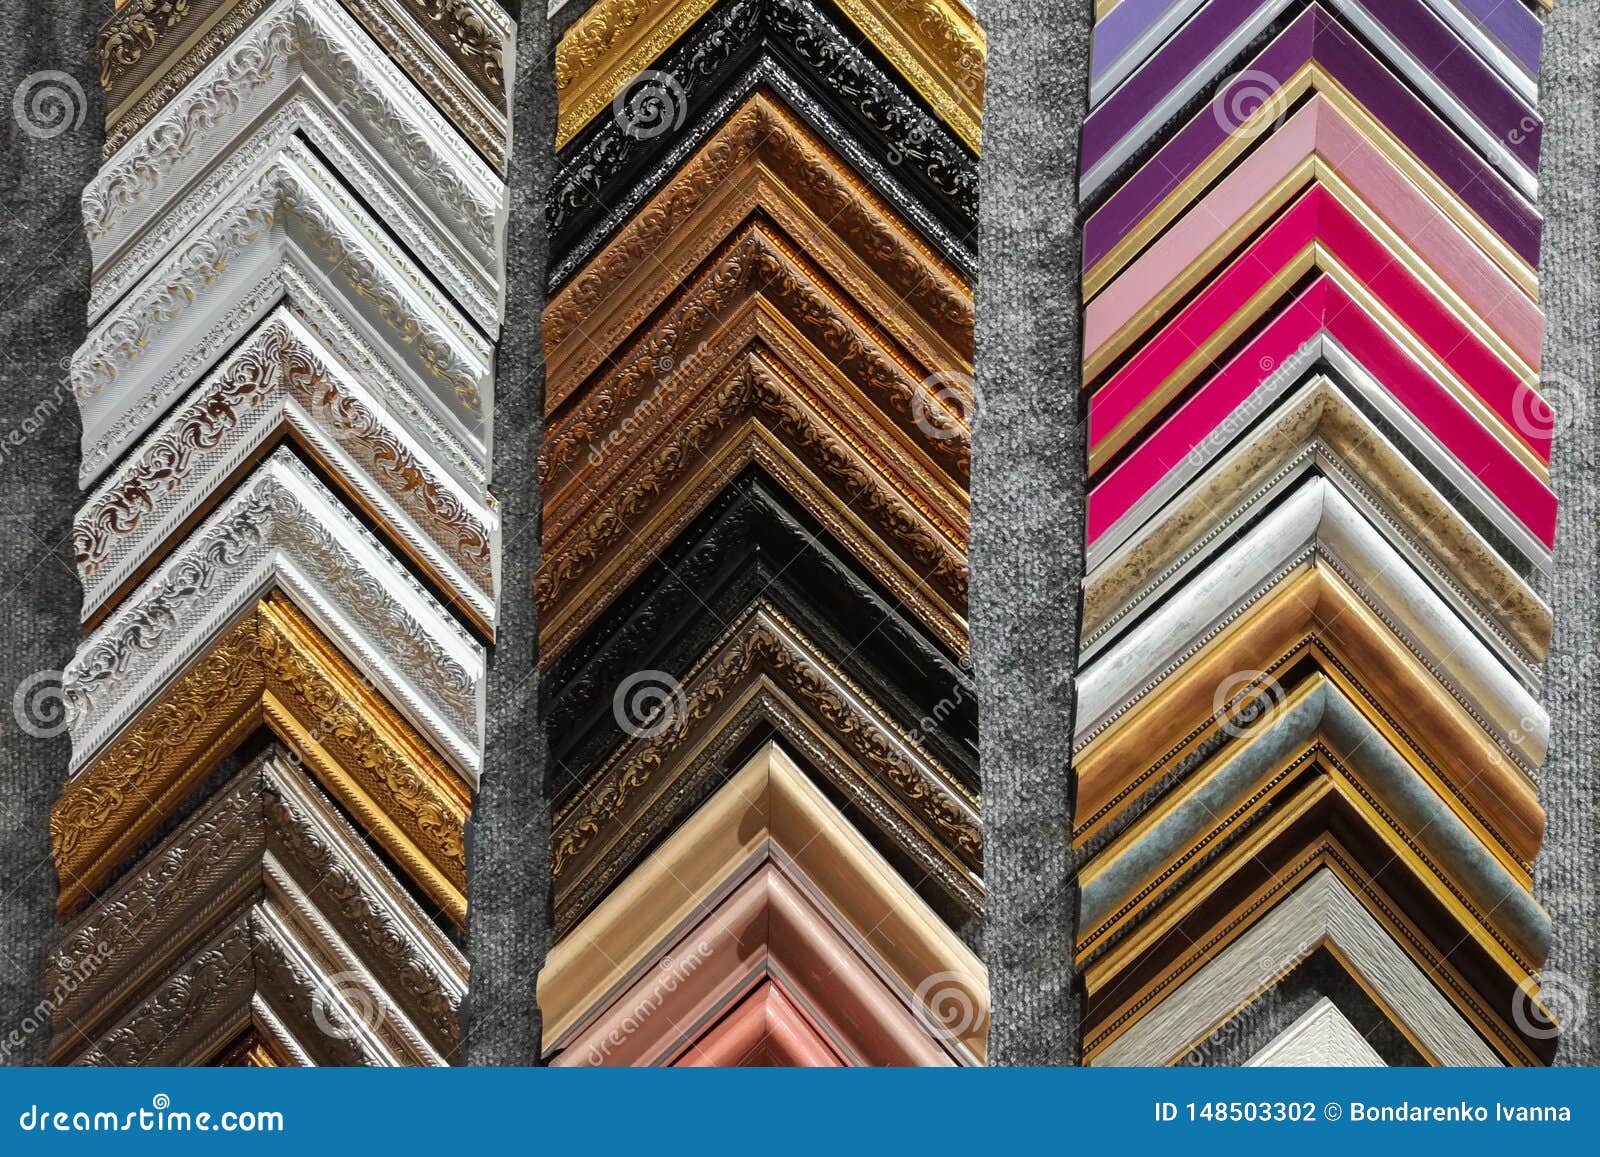 A Collection Of Solid Wood Photo Picture Frame Corner Samples Stock Photo Image of natural